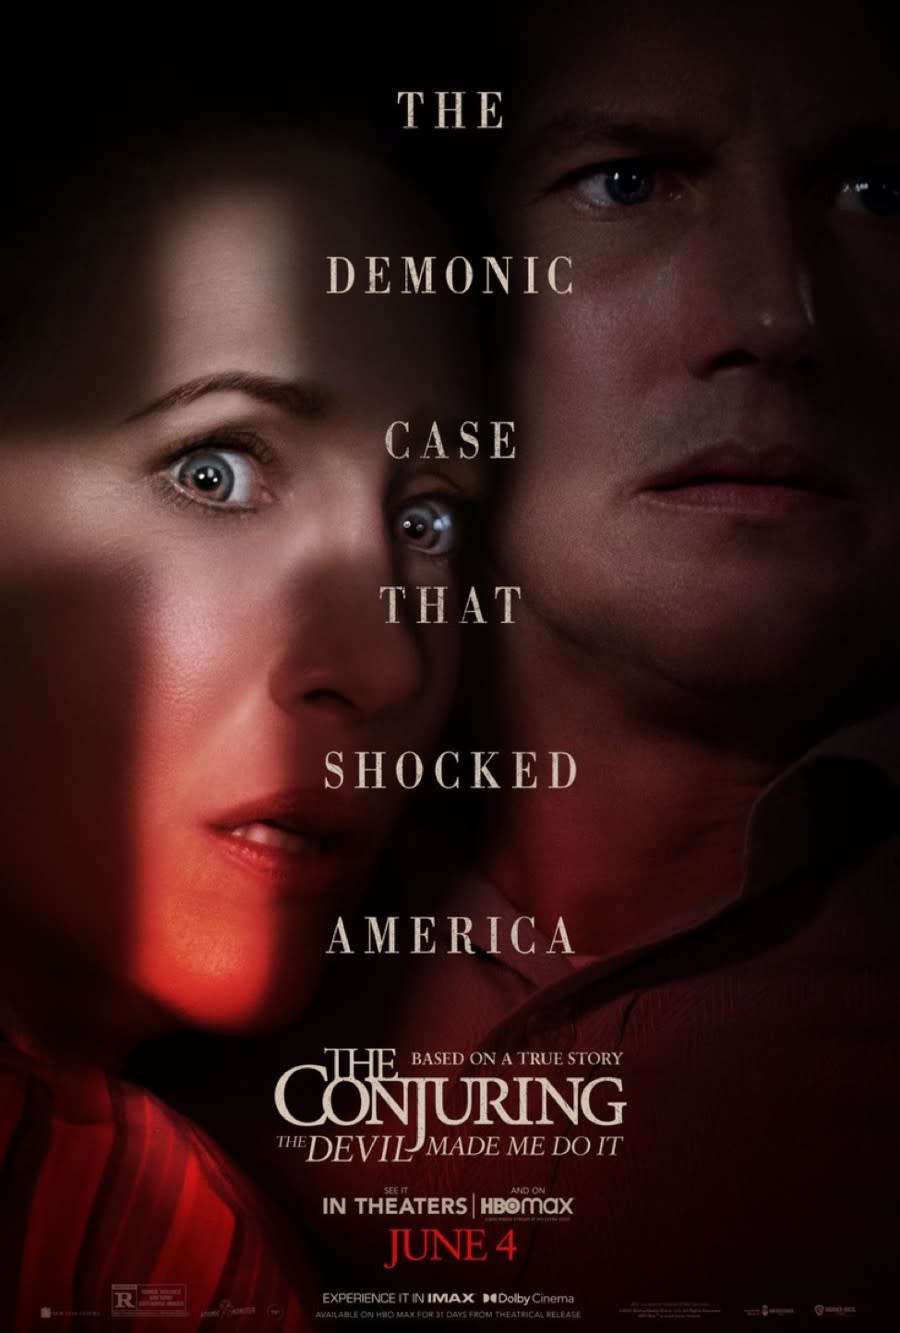 The poster for The Conjuring: The Devil Made Me Do It. 